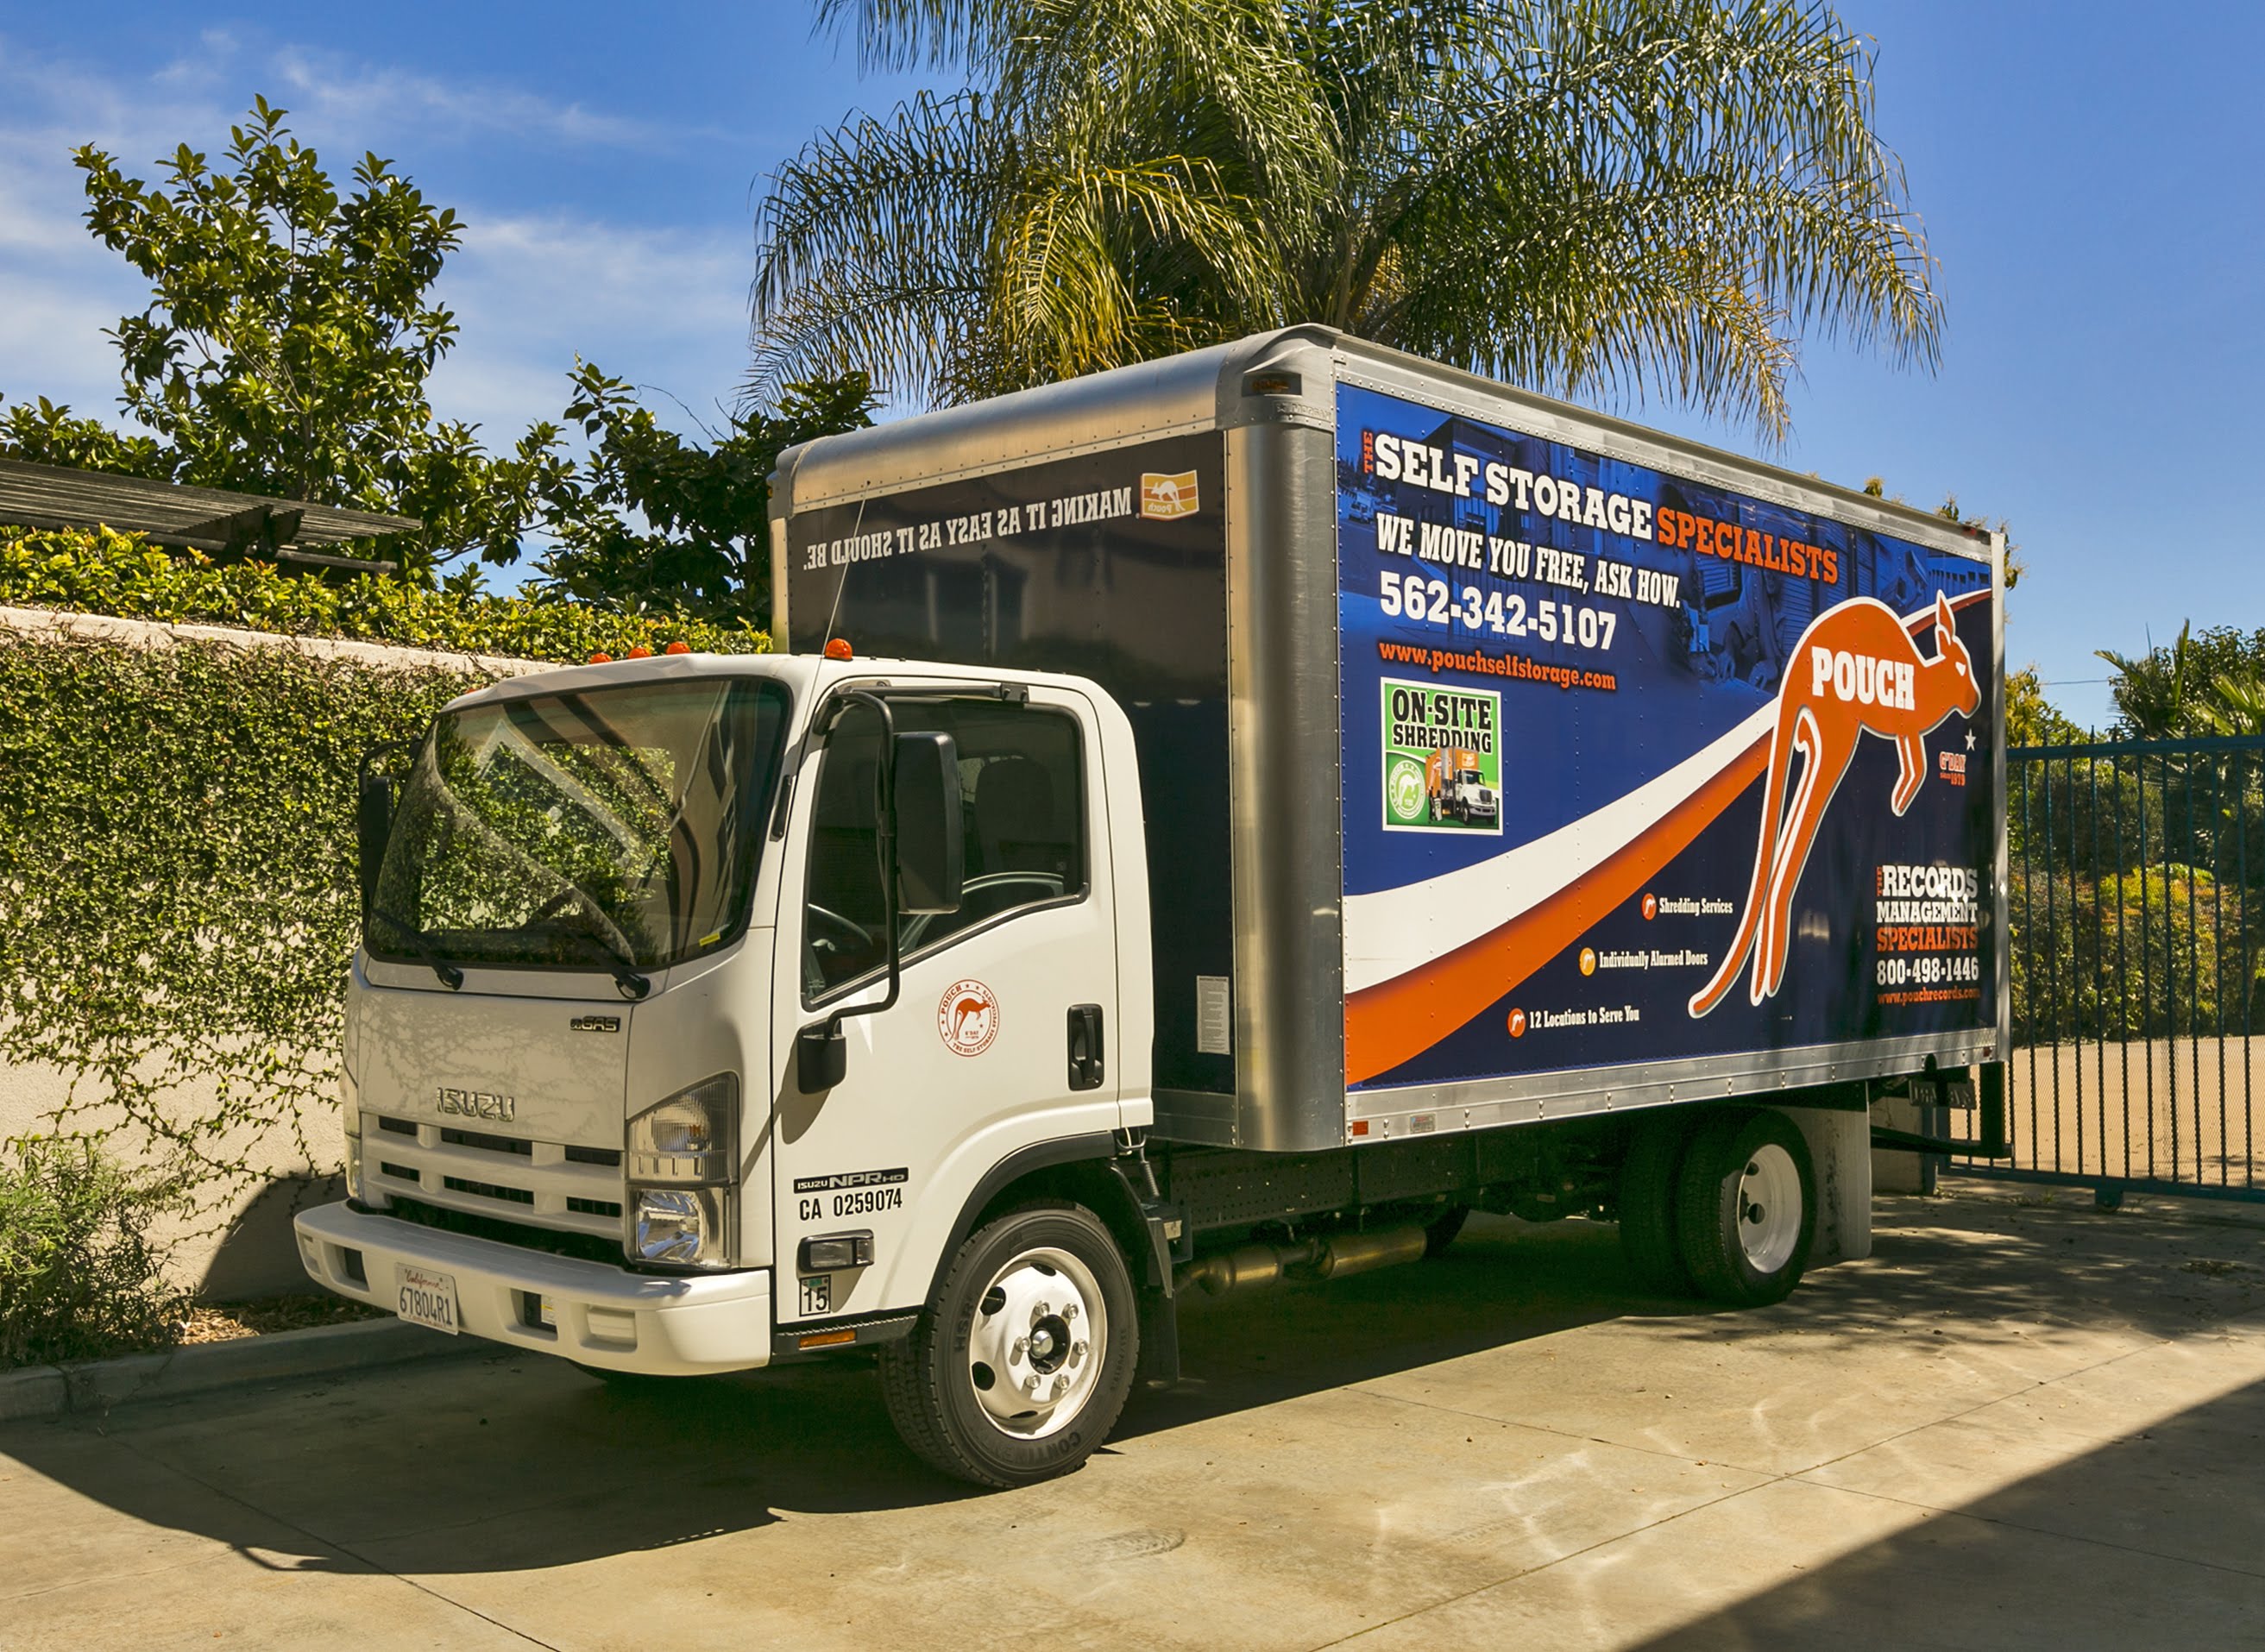 Pouch Self Storage moving truck